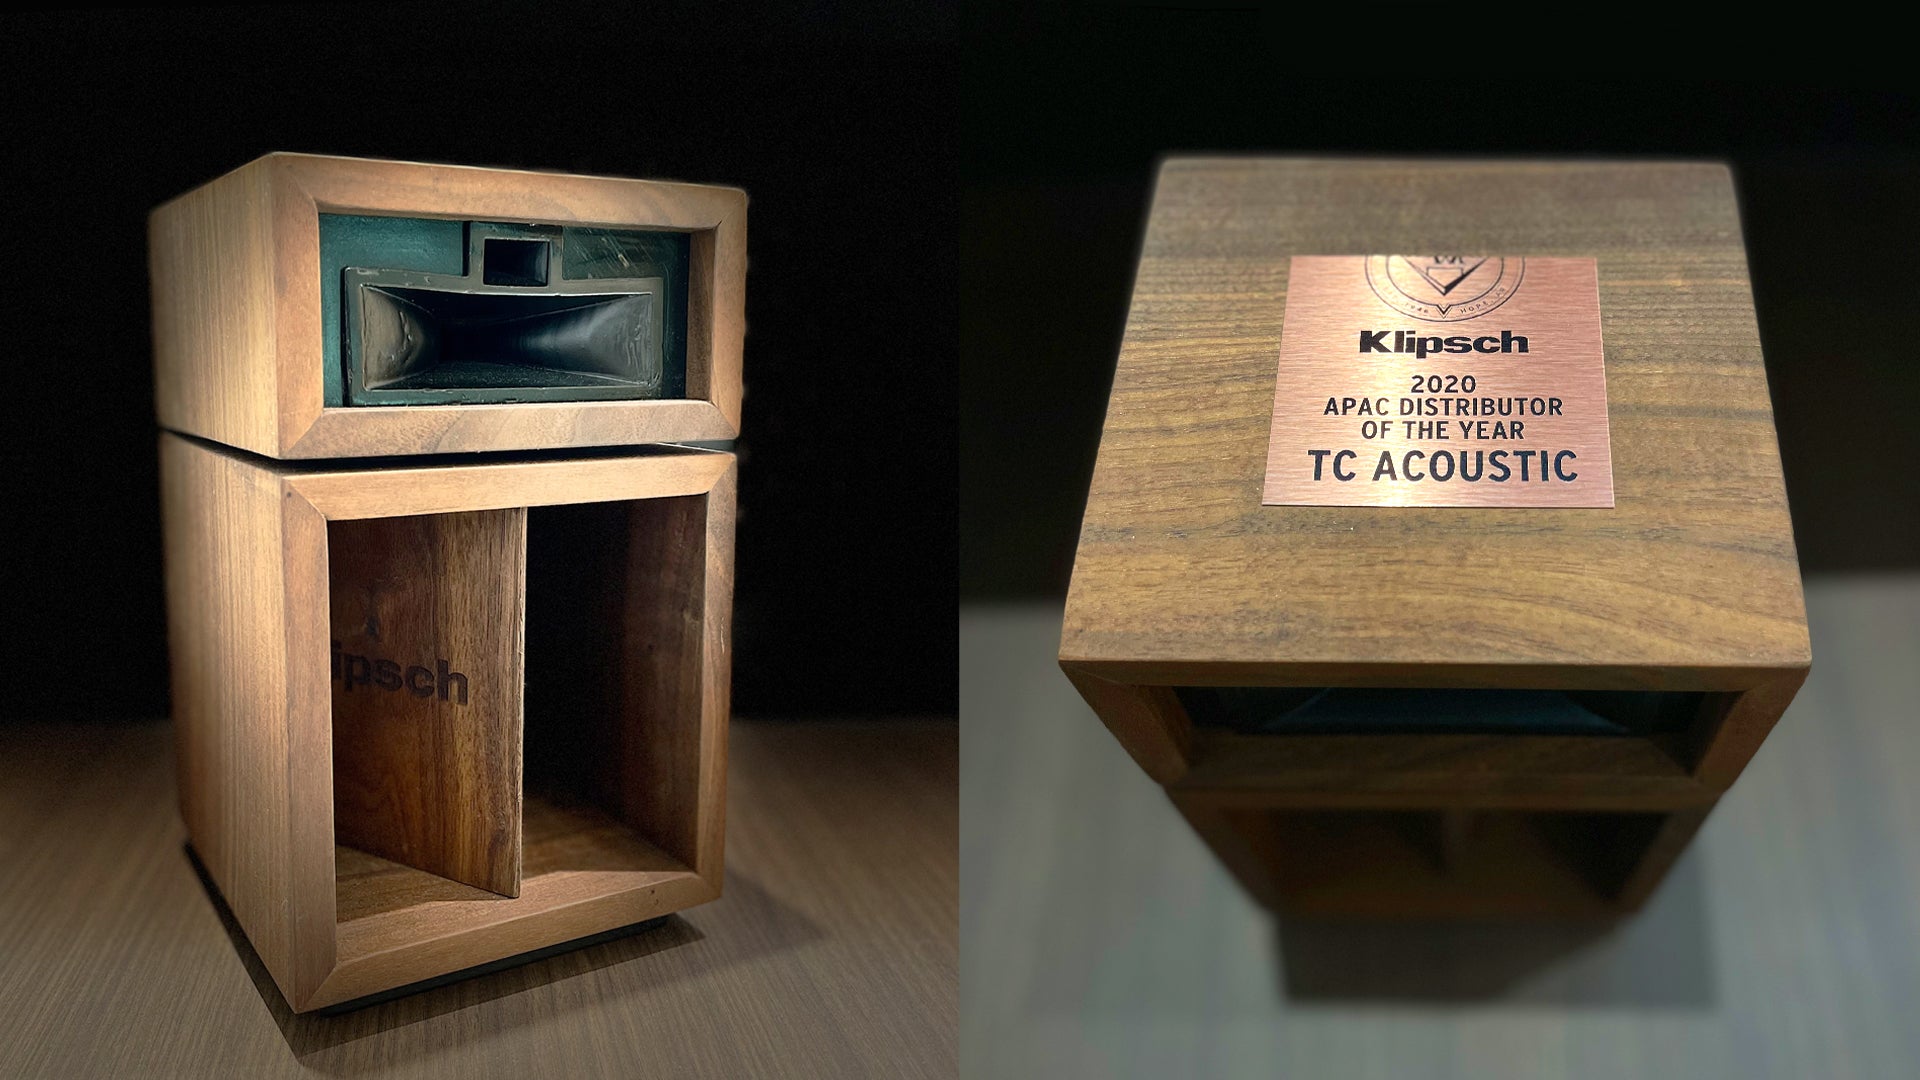 TC Acoustic was awarded Klipsch Top Asia-Pacific Distributor Award